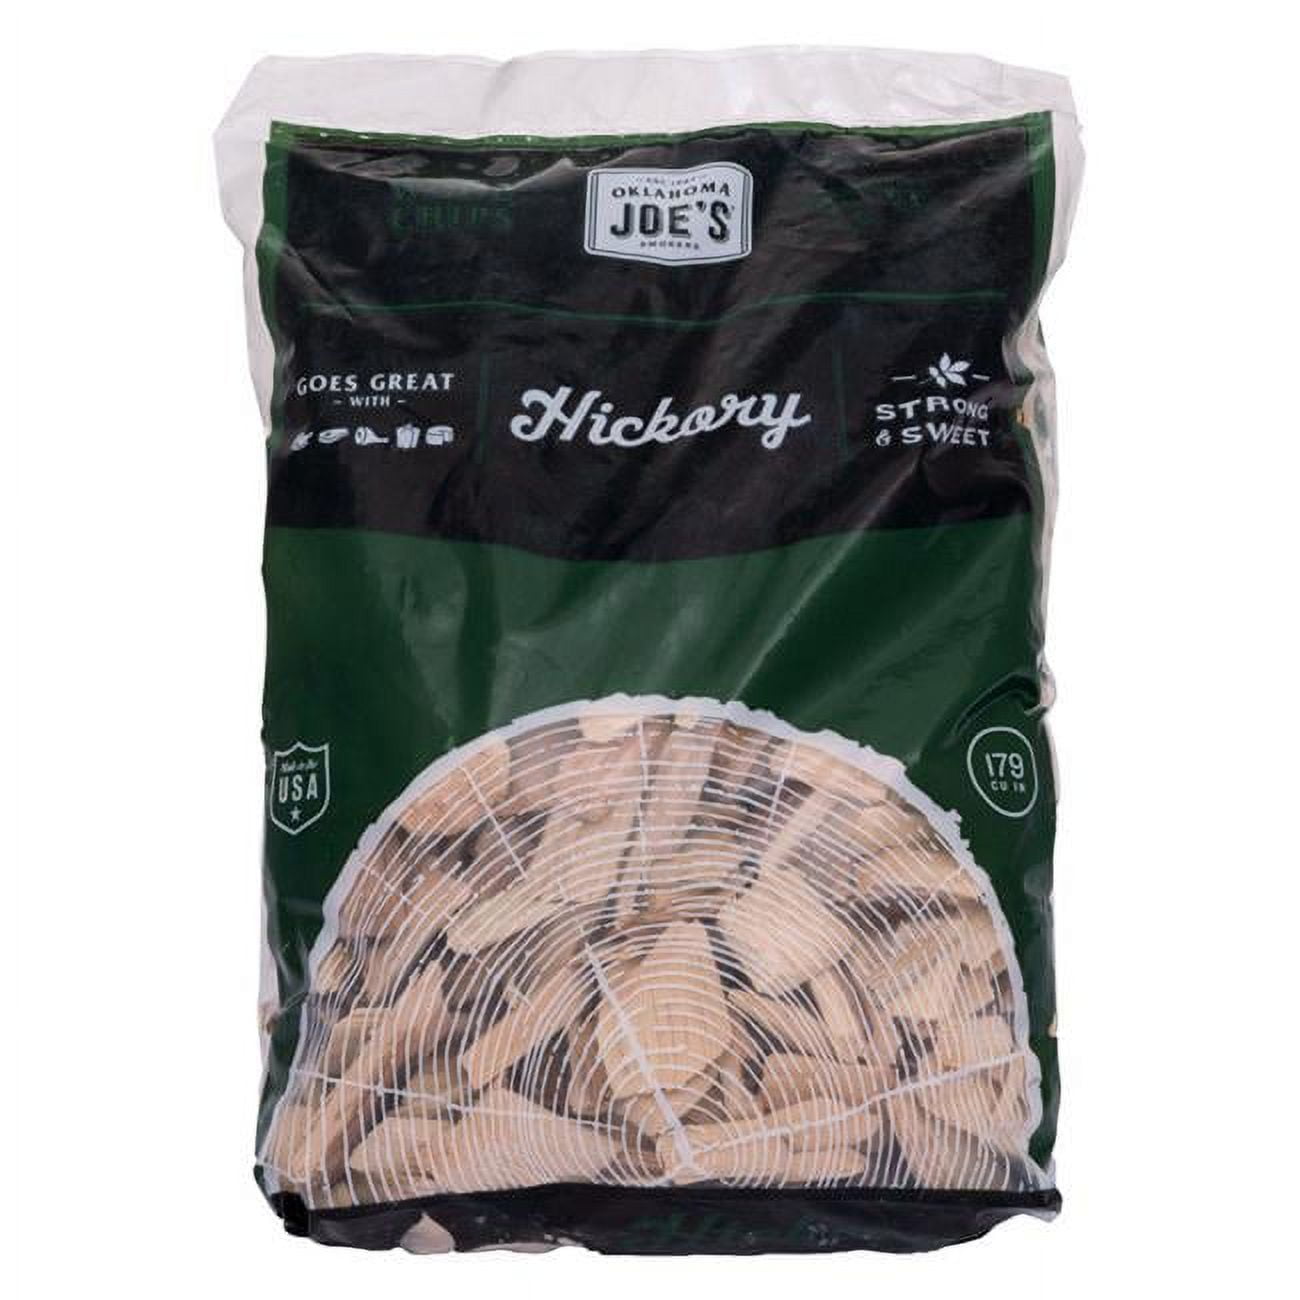 8011466 Char-broil Hickory Wood Smoking Chips, 2 Lbs